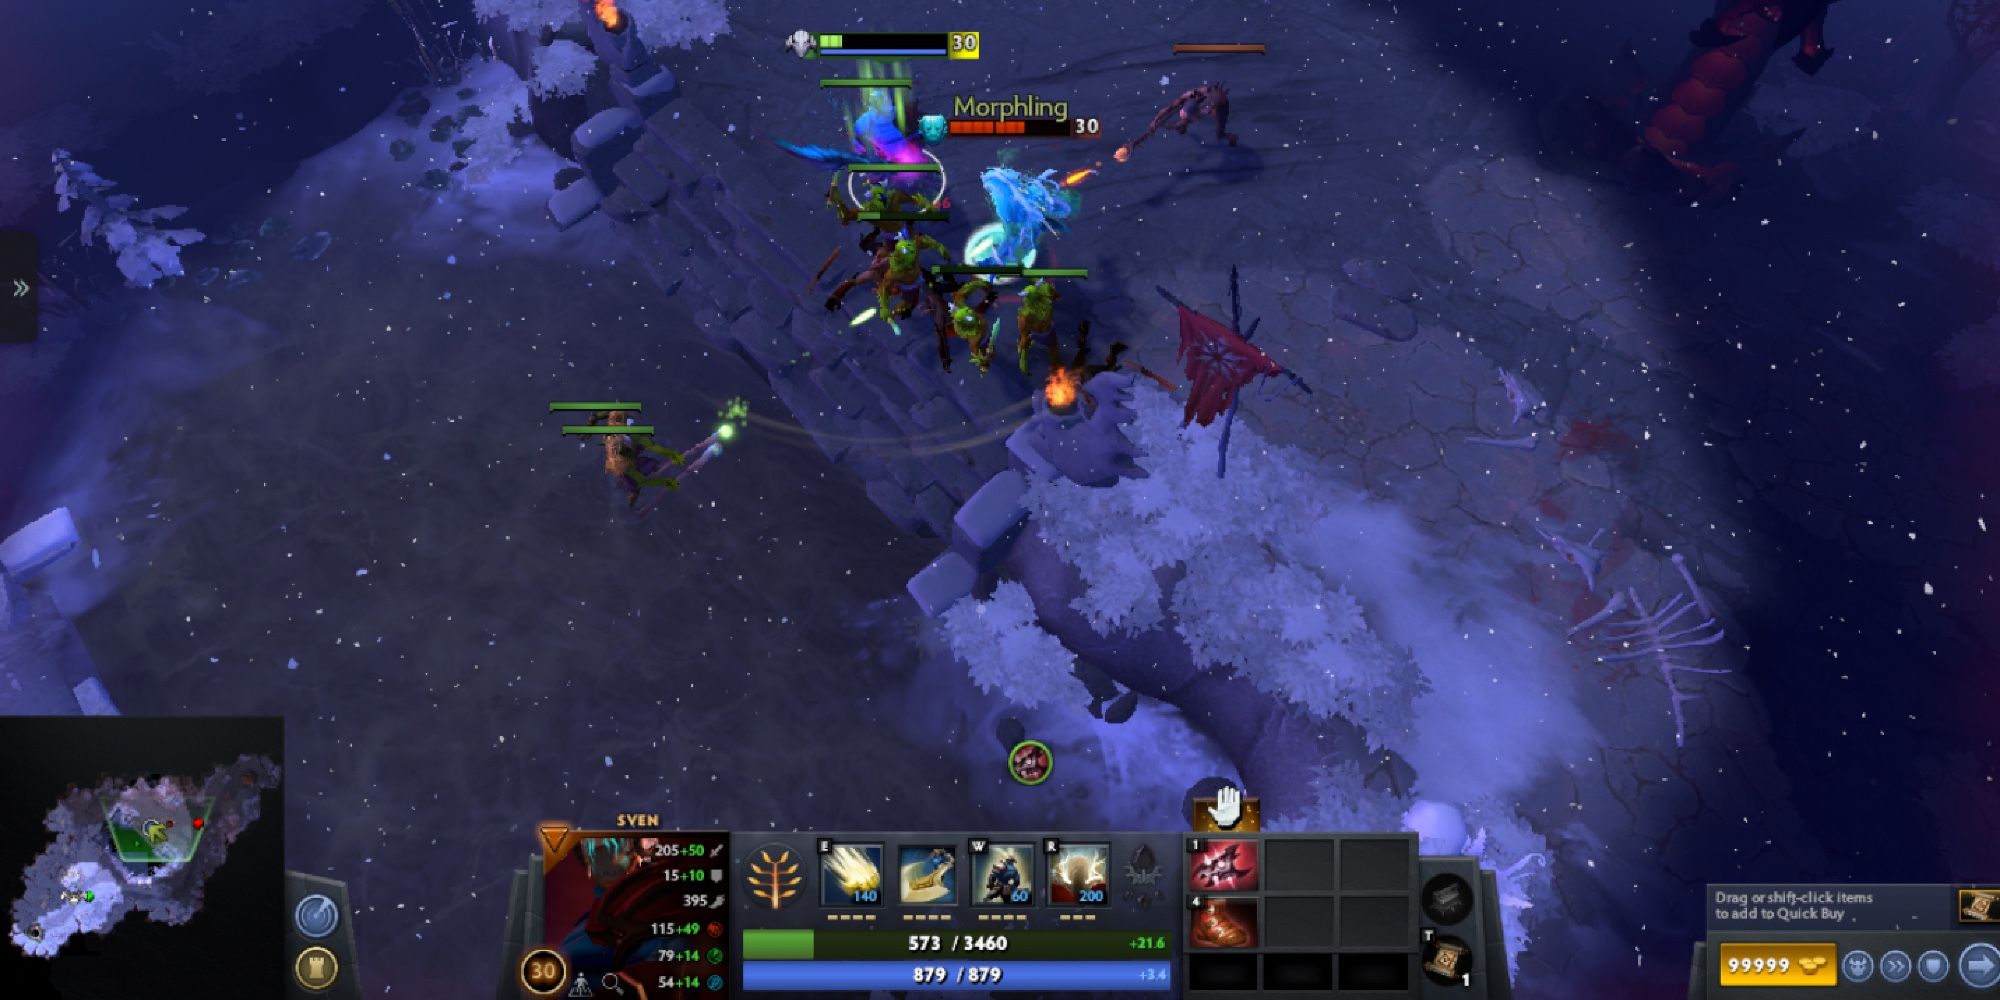 Dota 2 - Power Treads And Armlet of Mordiggian - Player activates item for increased HP